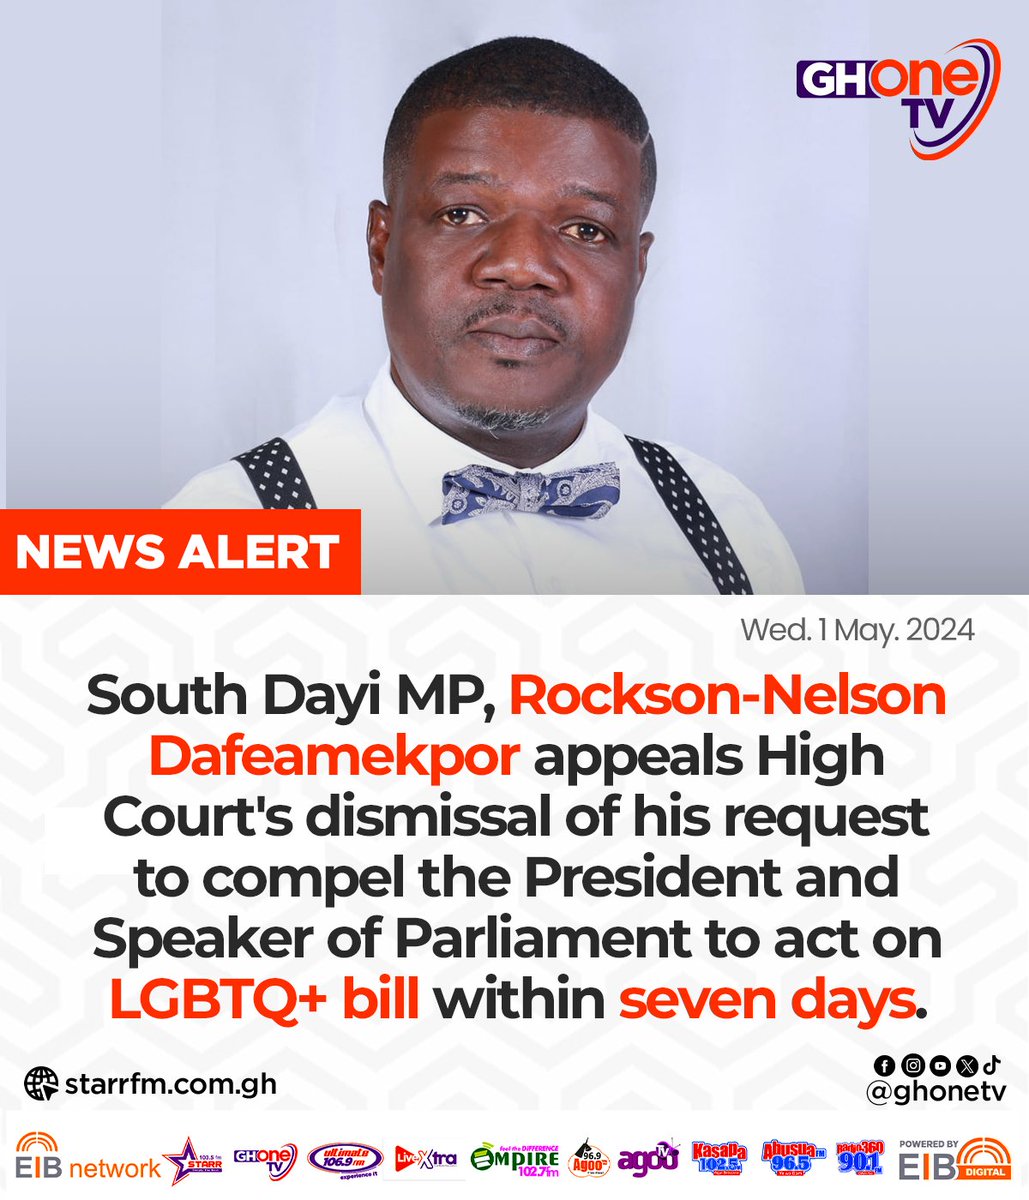 LGBTQ+ Bill: MP Rockson-Nelson Dafeamekpor files appeal against dismissal of request to compel Akufo-Addo & Bagbin to act on bill within seven days... 

#GHOneNews #GHOneTV